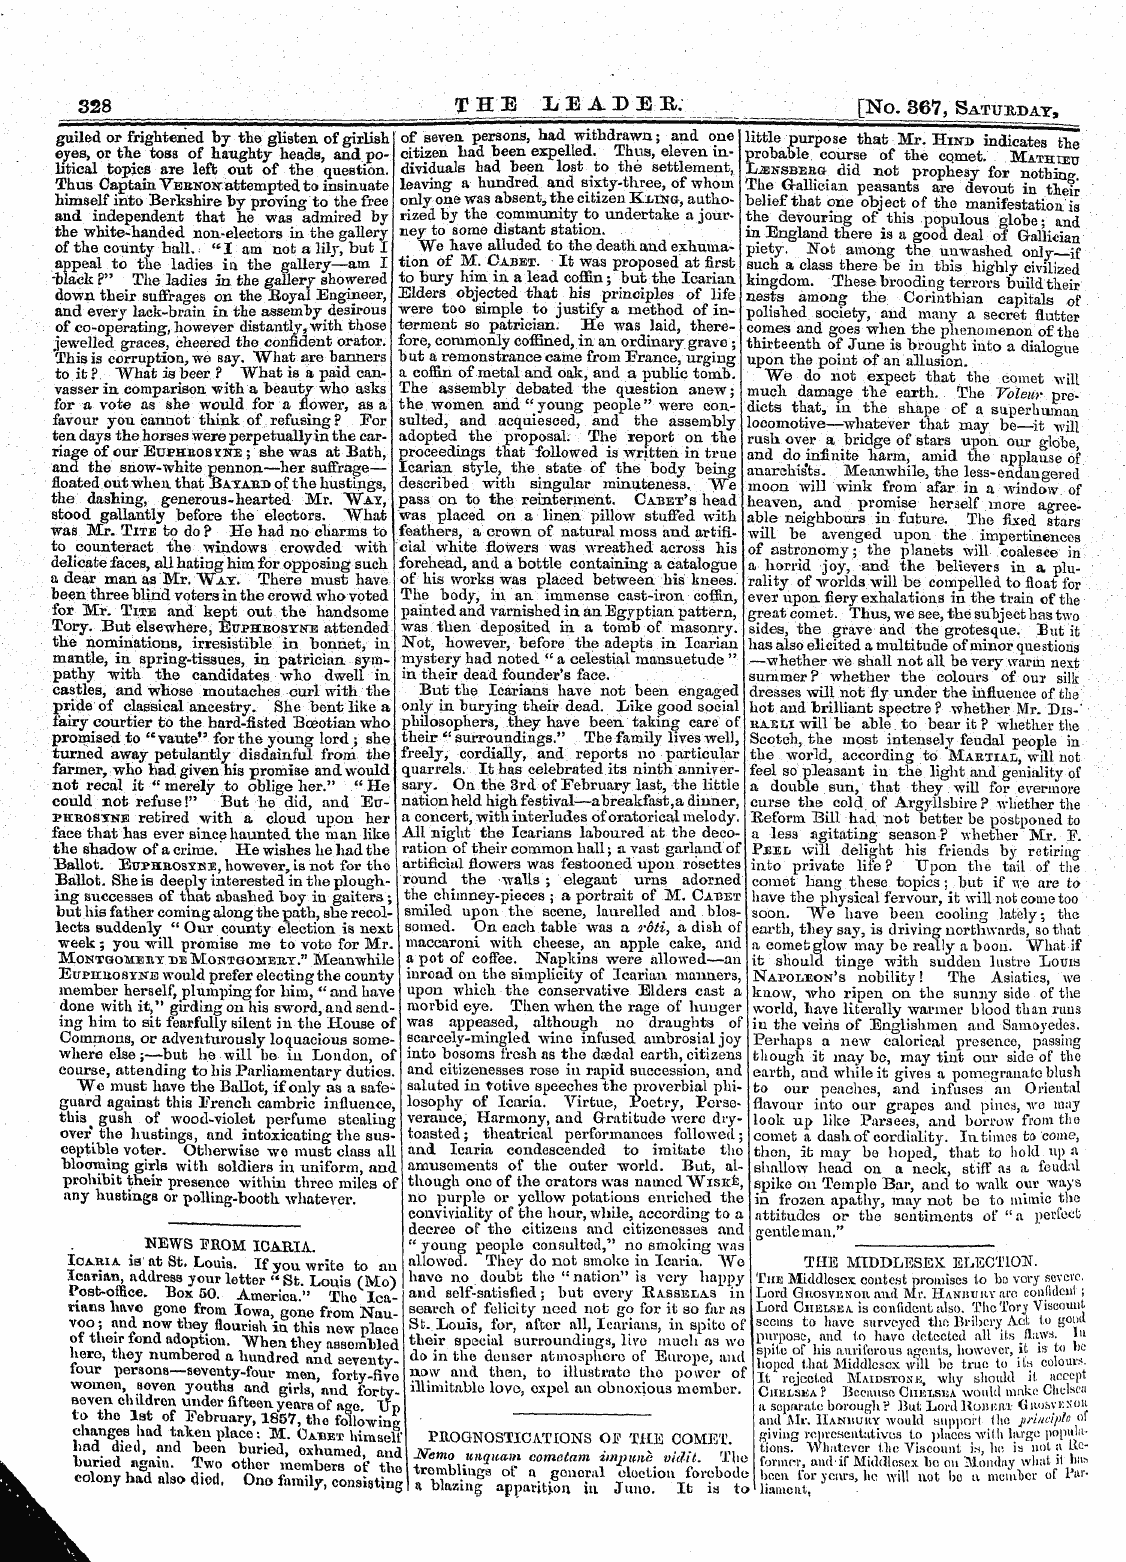 Leader (1850-1860): jS F Y, 1st edition - News T?Rom 10aria.